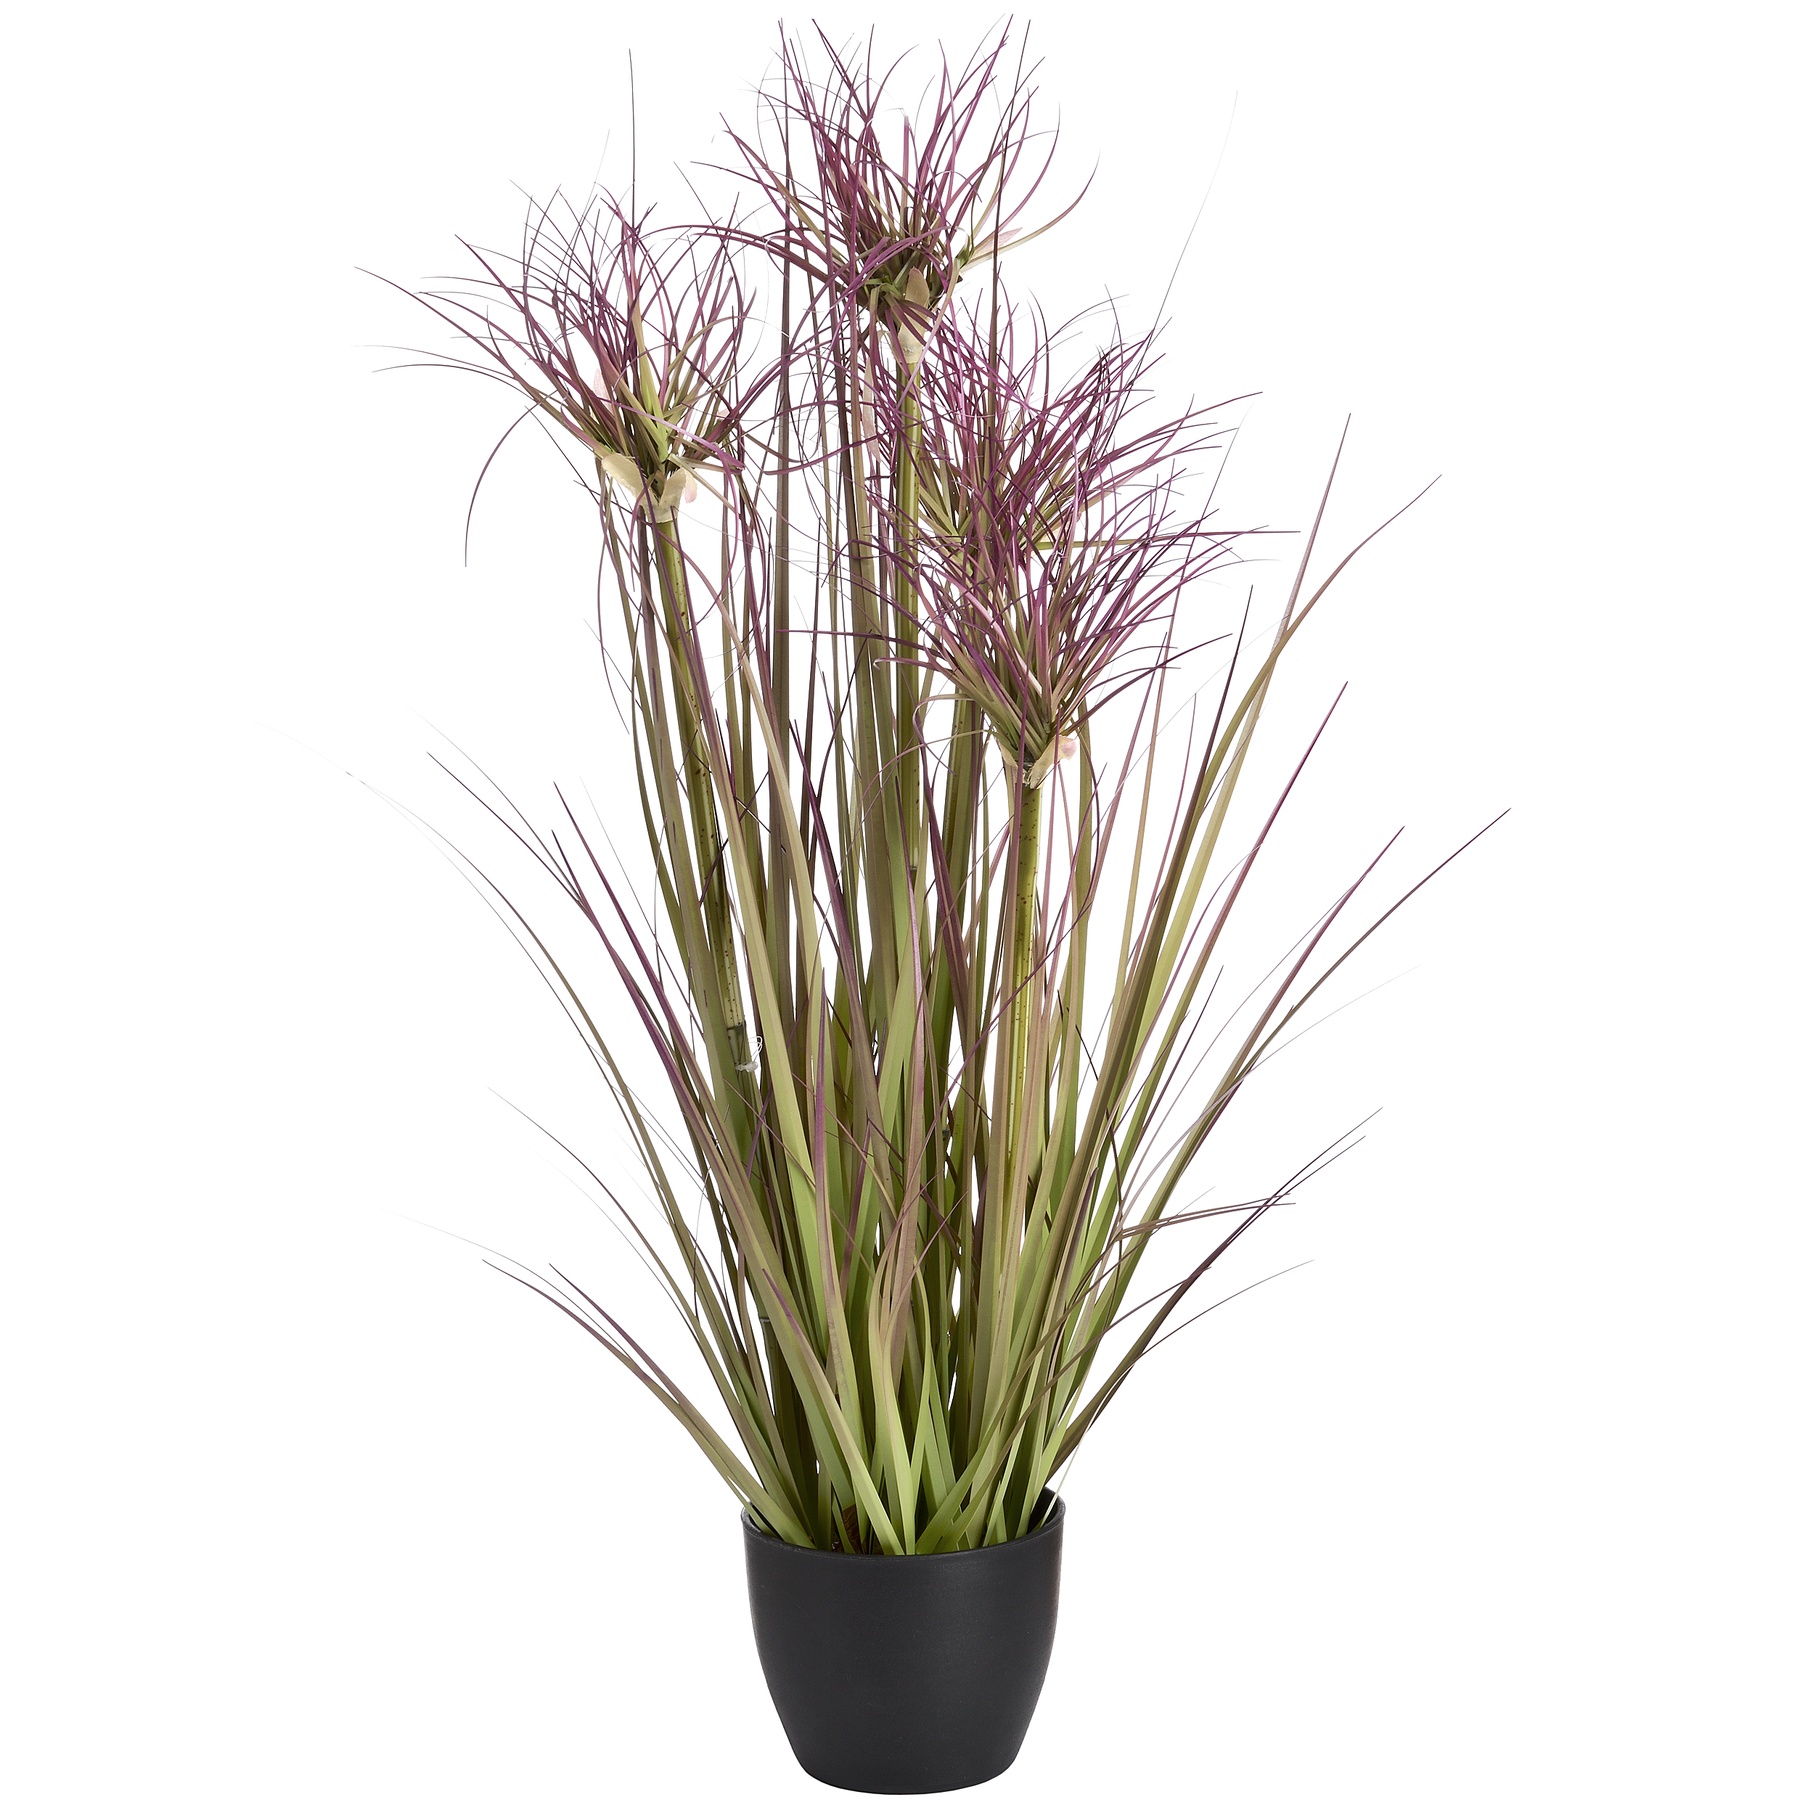 Water Bamboo Grass 24 Inch - Image 1